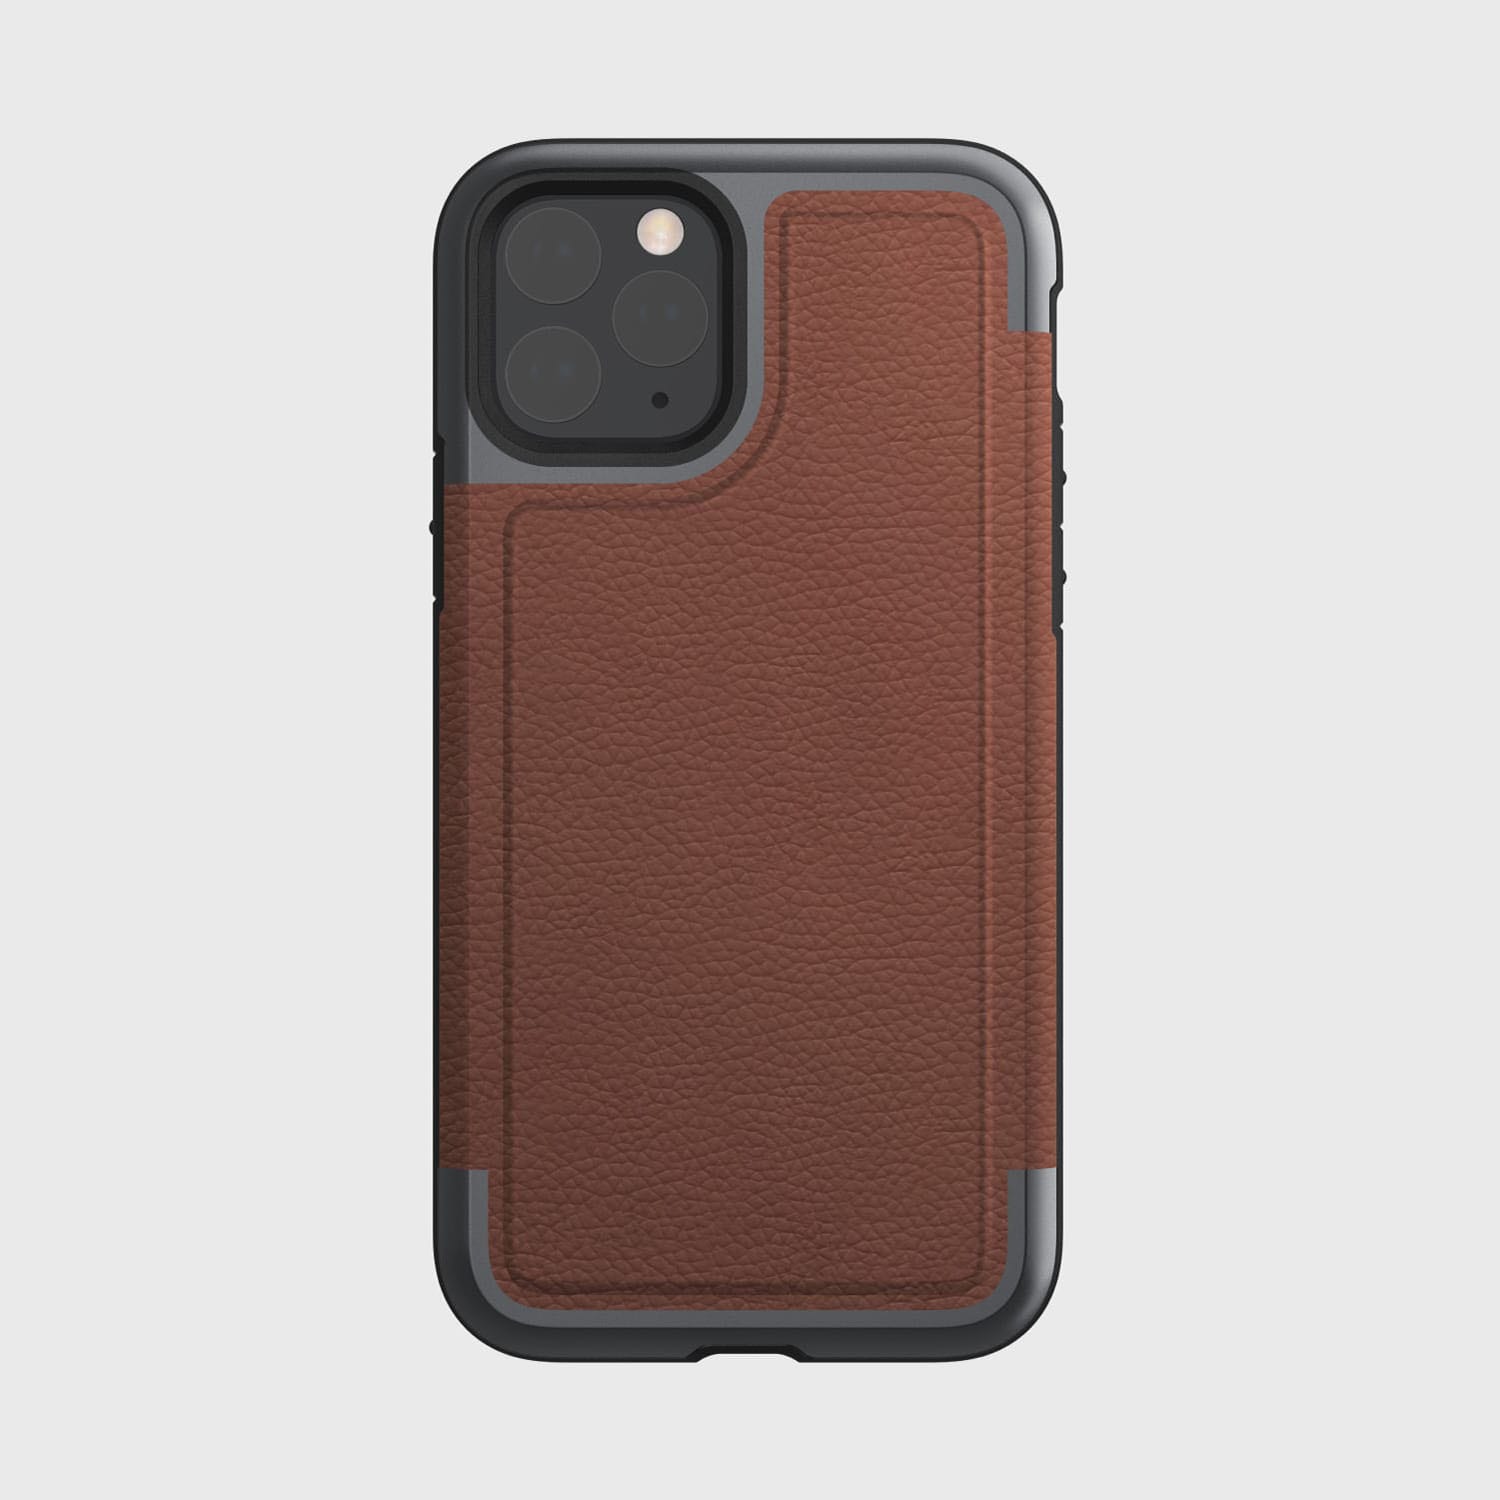 A protective brown leather case for the iPhone 11 Pro that offers drop protection - Raptic's iPhone 11 Pro Case - Prime.